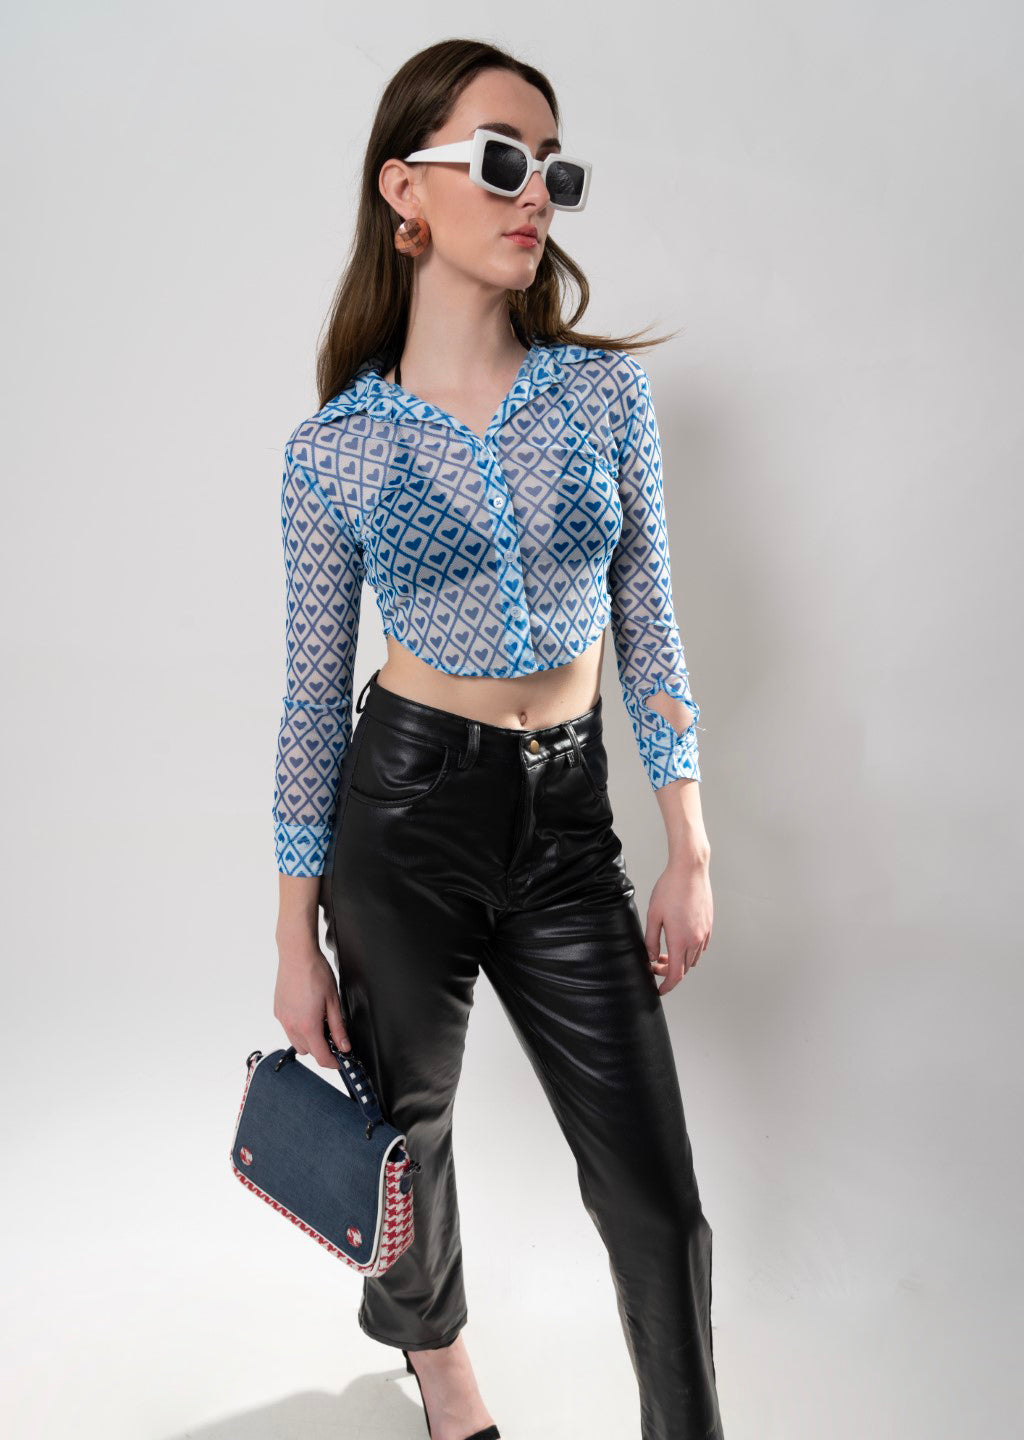 Little Hearts Printed Shirt in Mesh